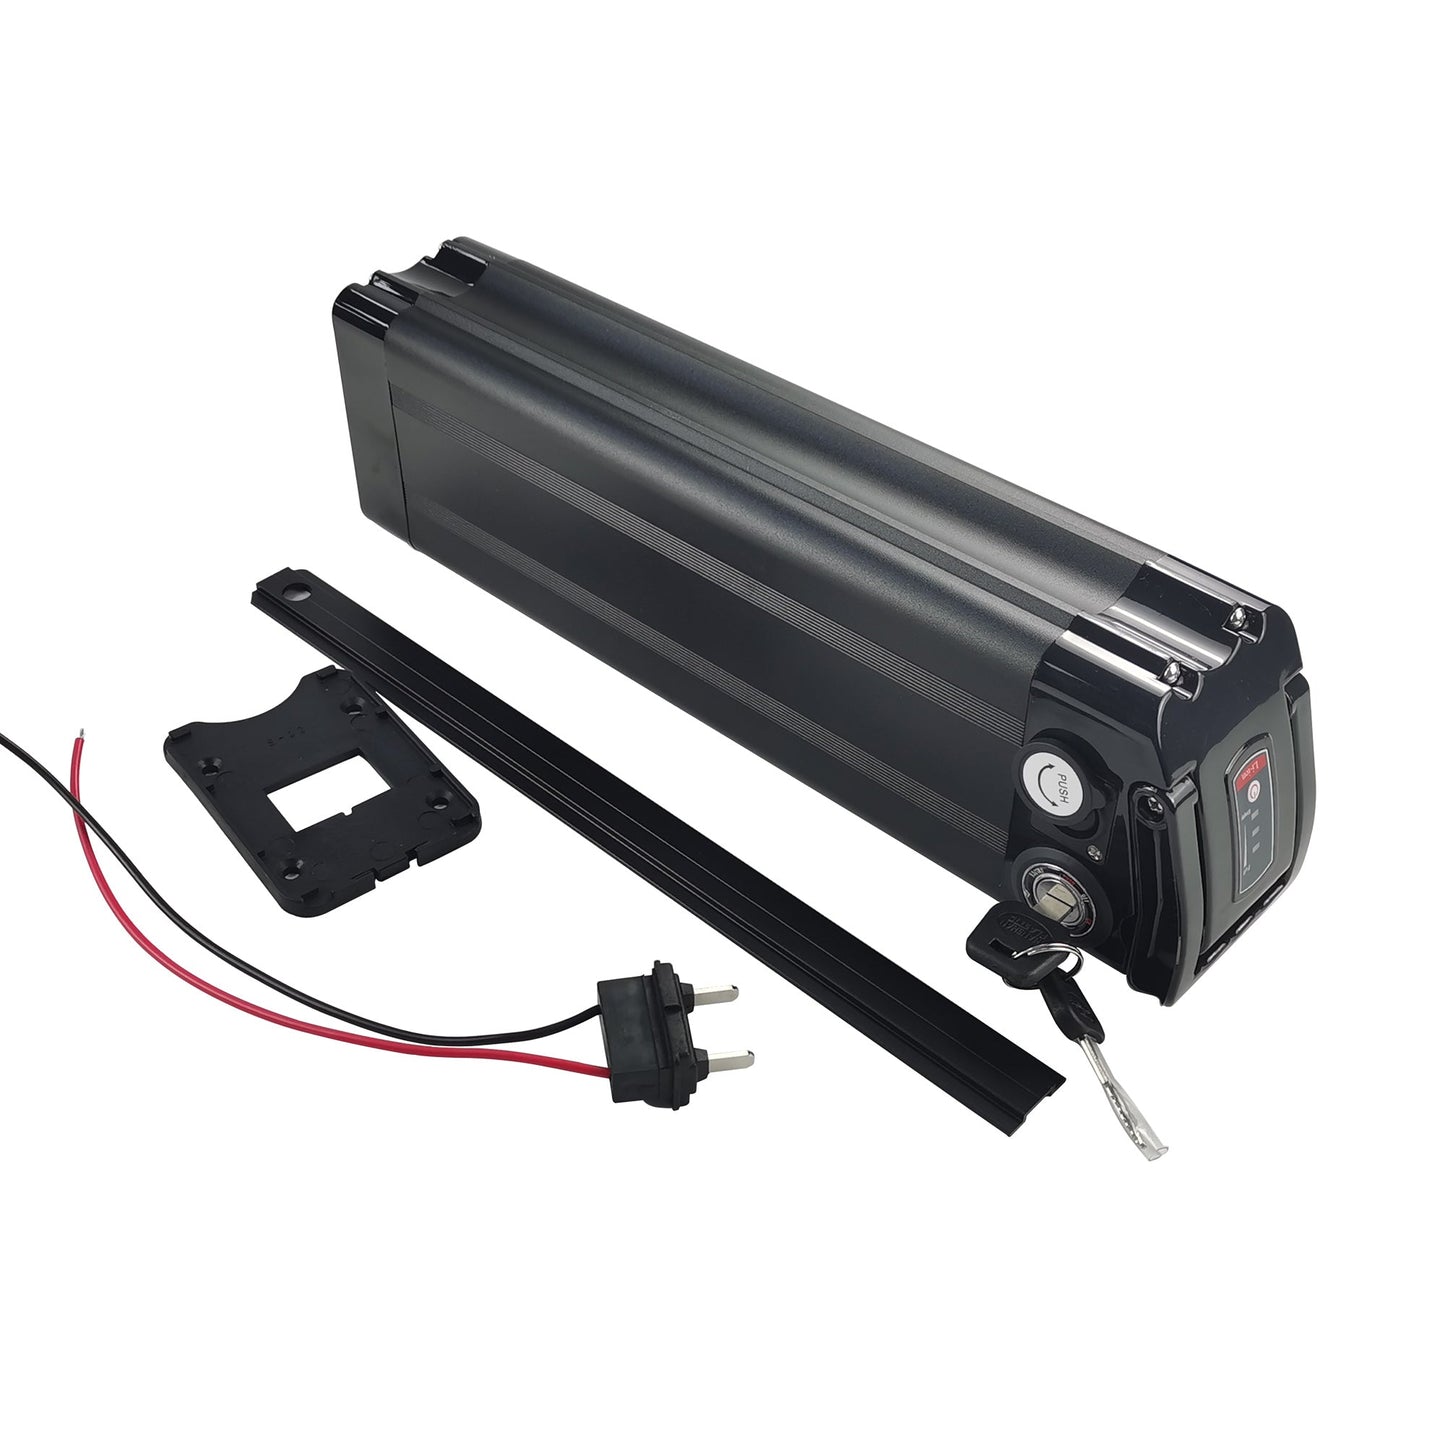 France Stock 48V14AH Silver Fish ebike battery Panasonic cell 30A BMS support 1400W motor included 3A charger